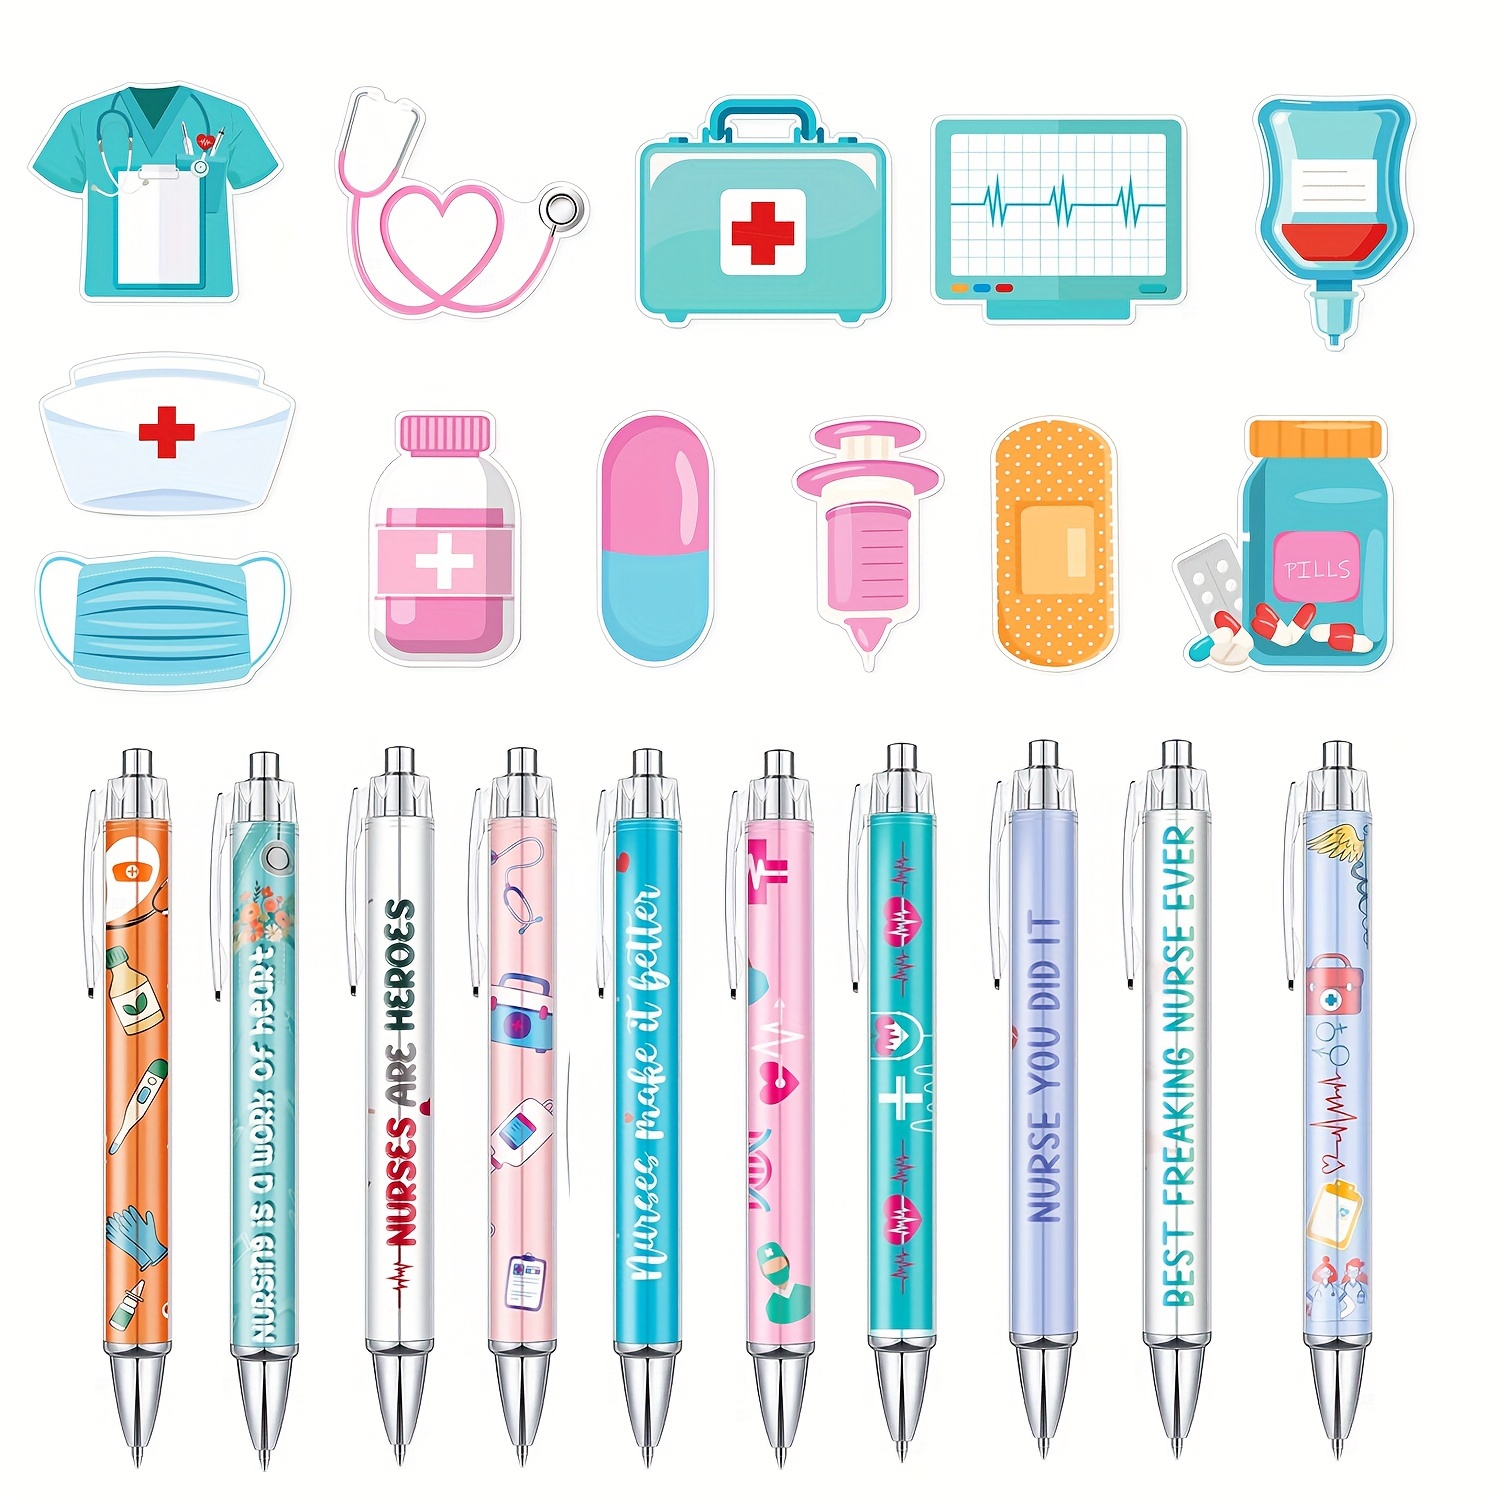 

22-piece Retractable Ballpoint Pen Set For Nurses And Medical Professionals, Medium Point, Durable Plastic, Ideal Gift For Doctors, Nurses, Medical & Nursing Students - Assorted